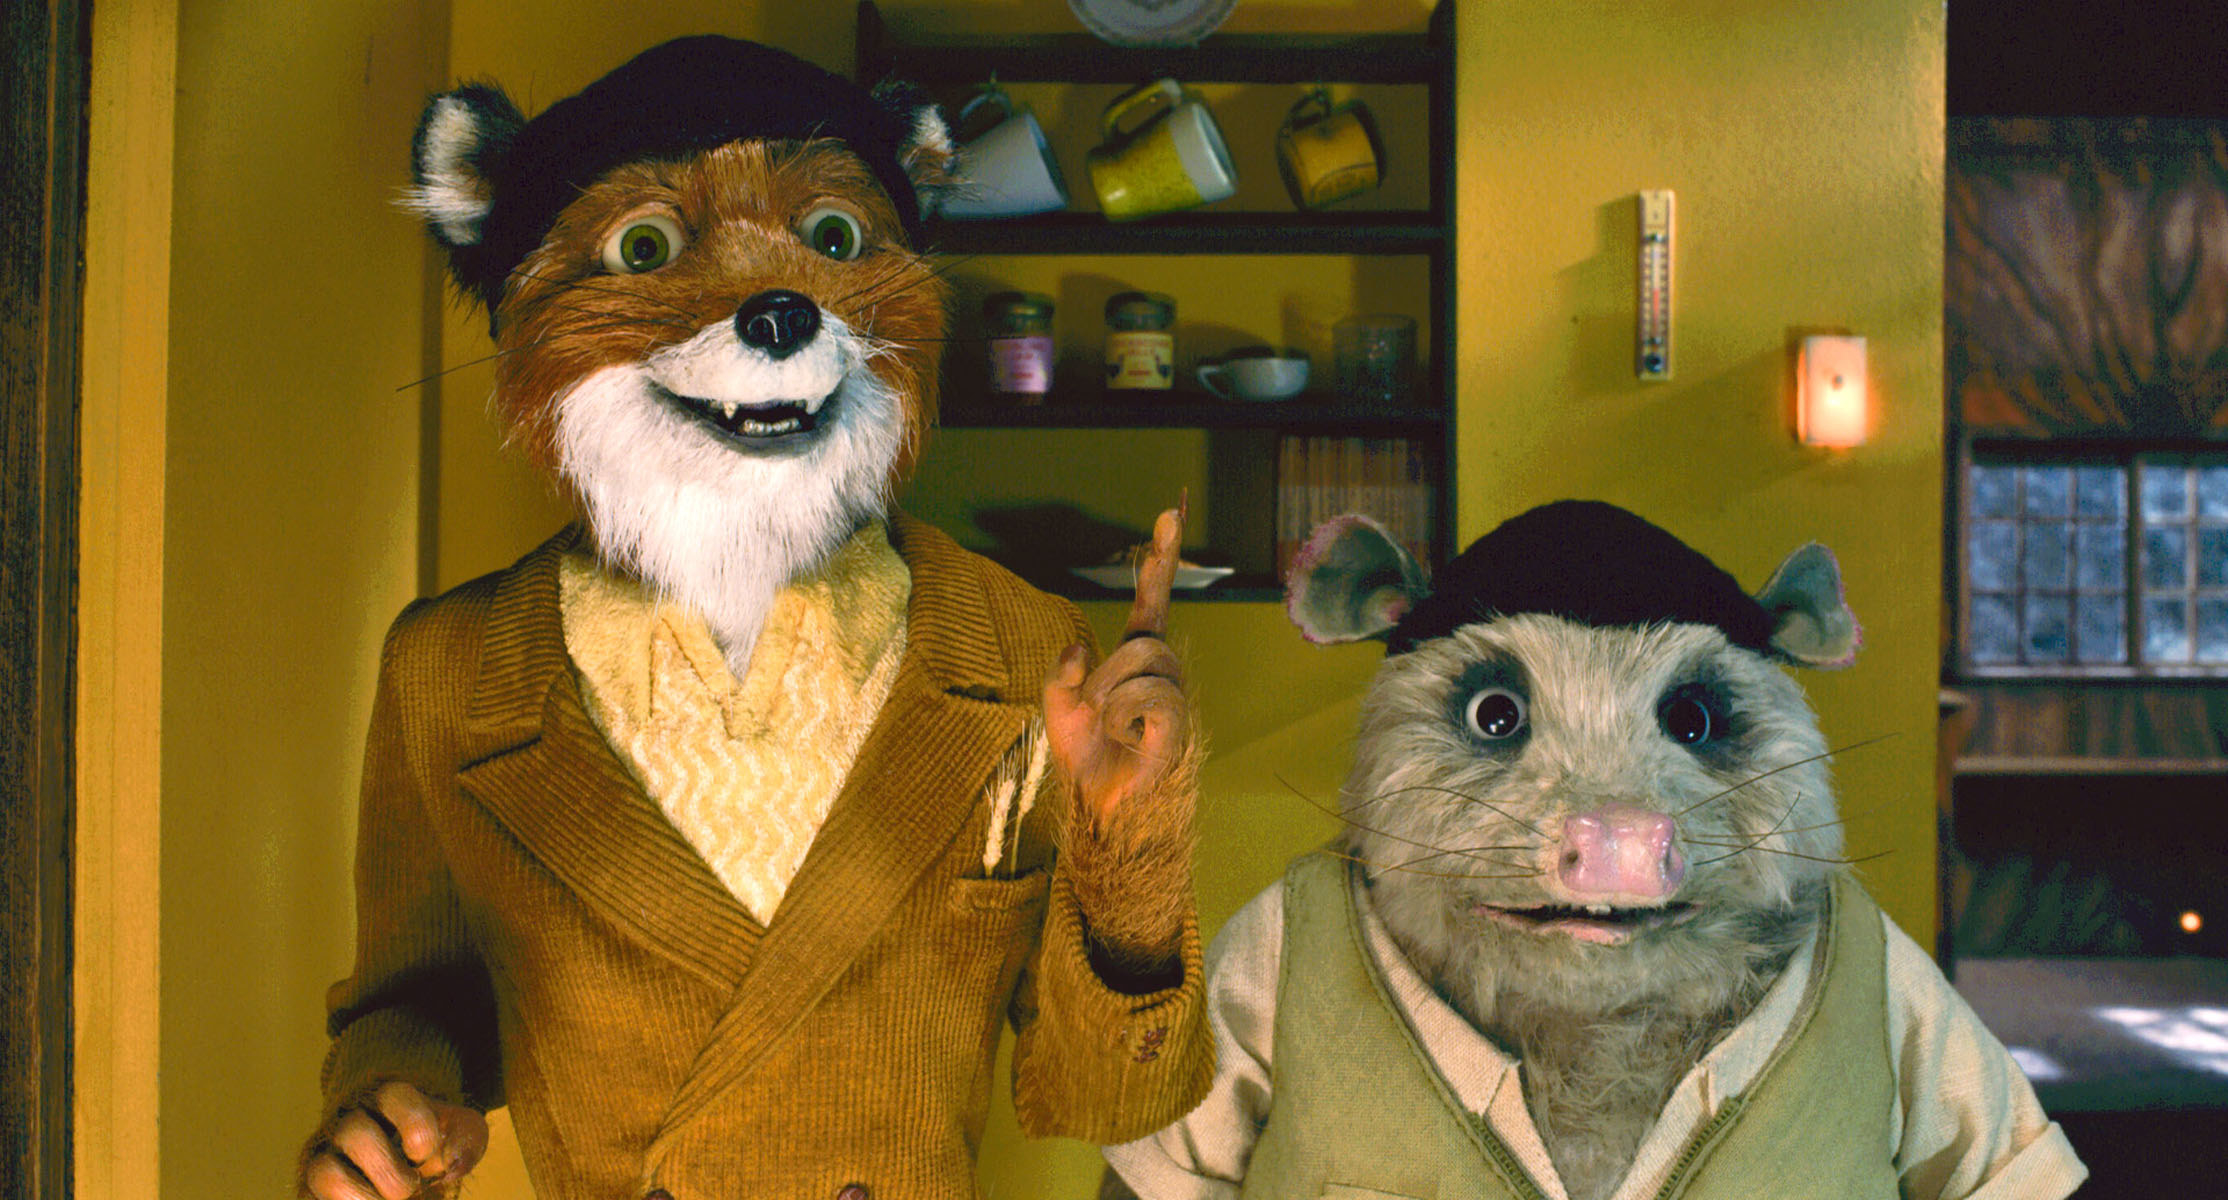 Mr. Fox and Kylie stand next to each other with hats on